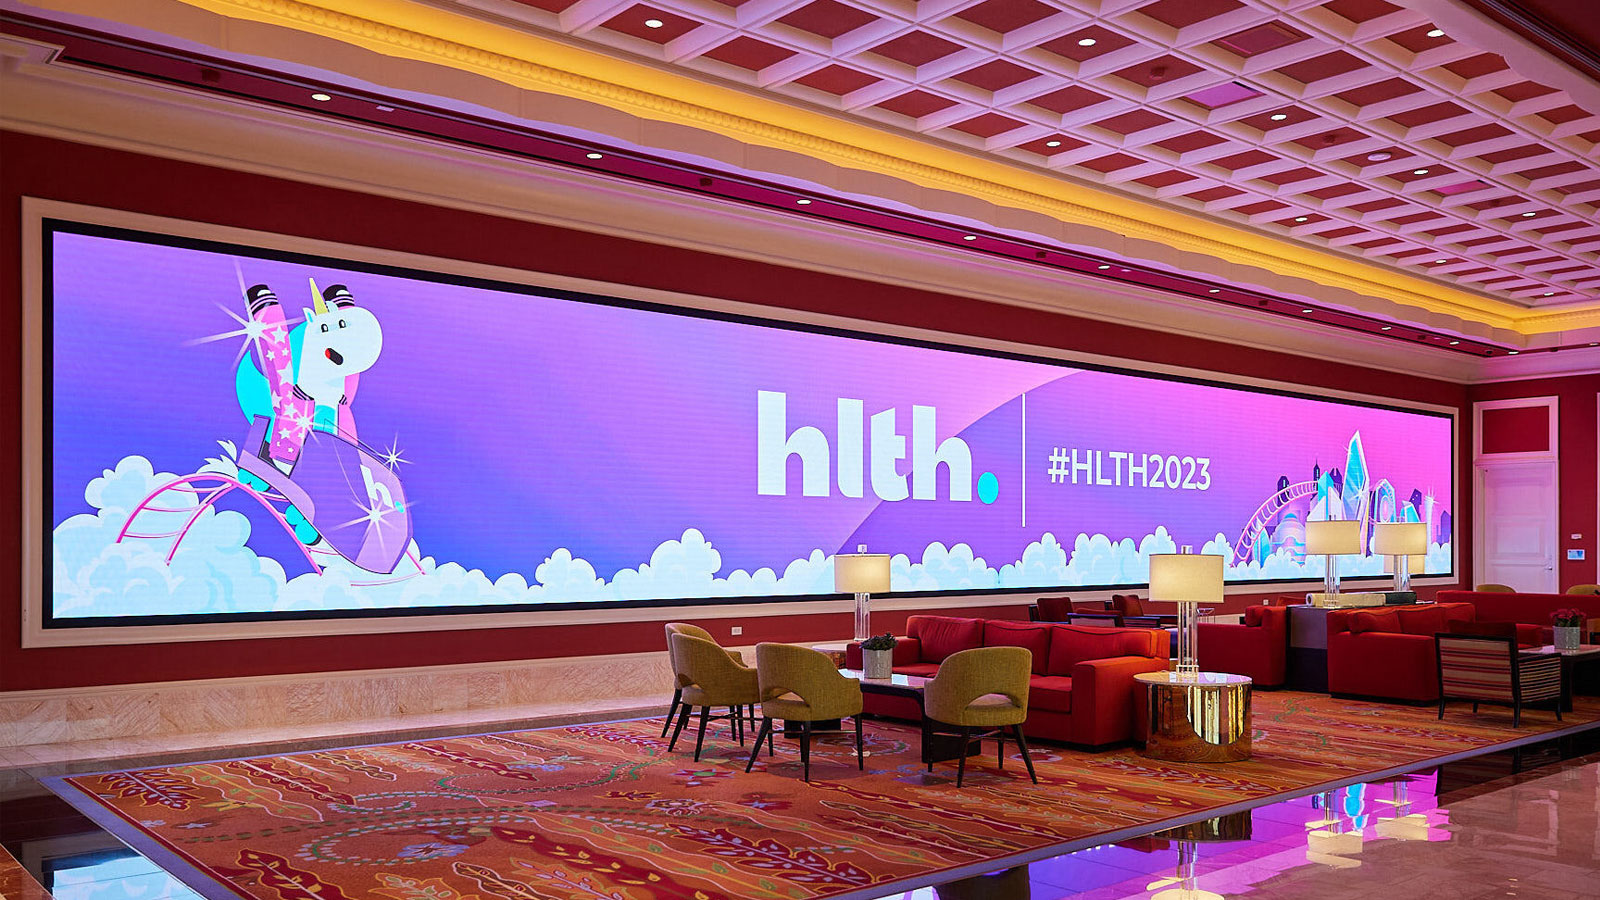 image of the HLTH conference panel